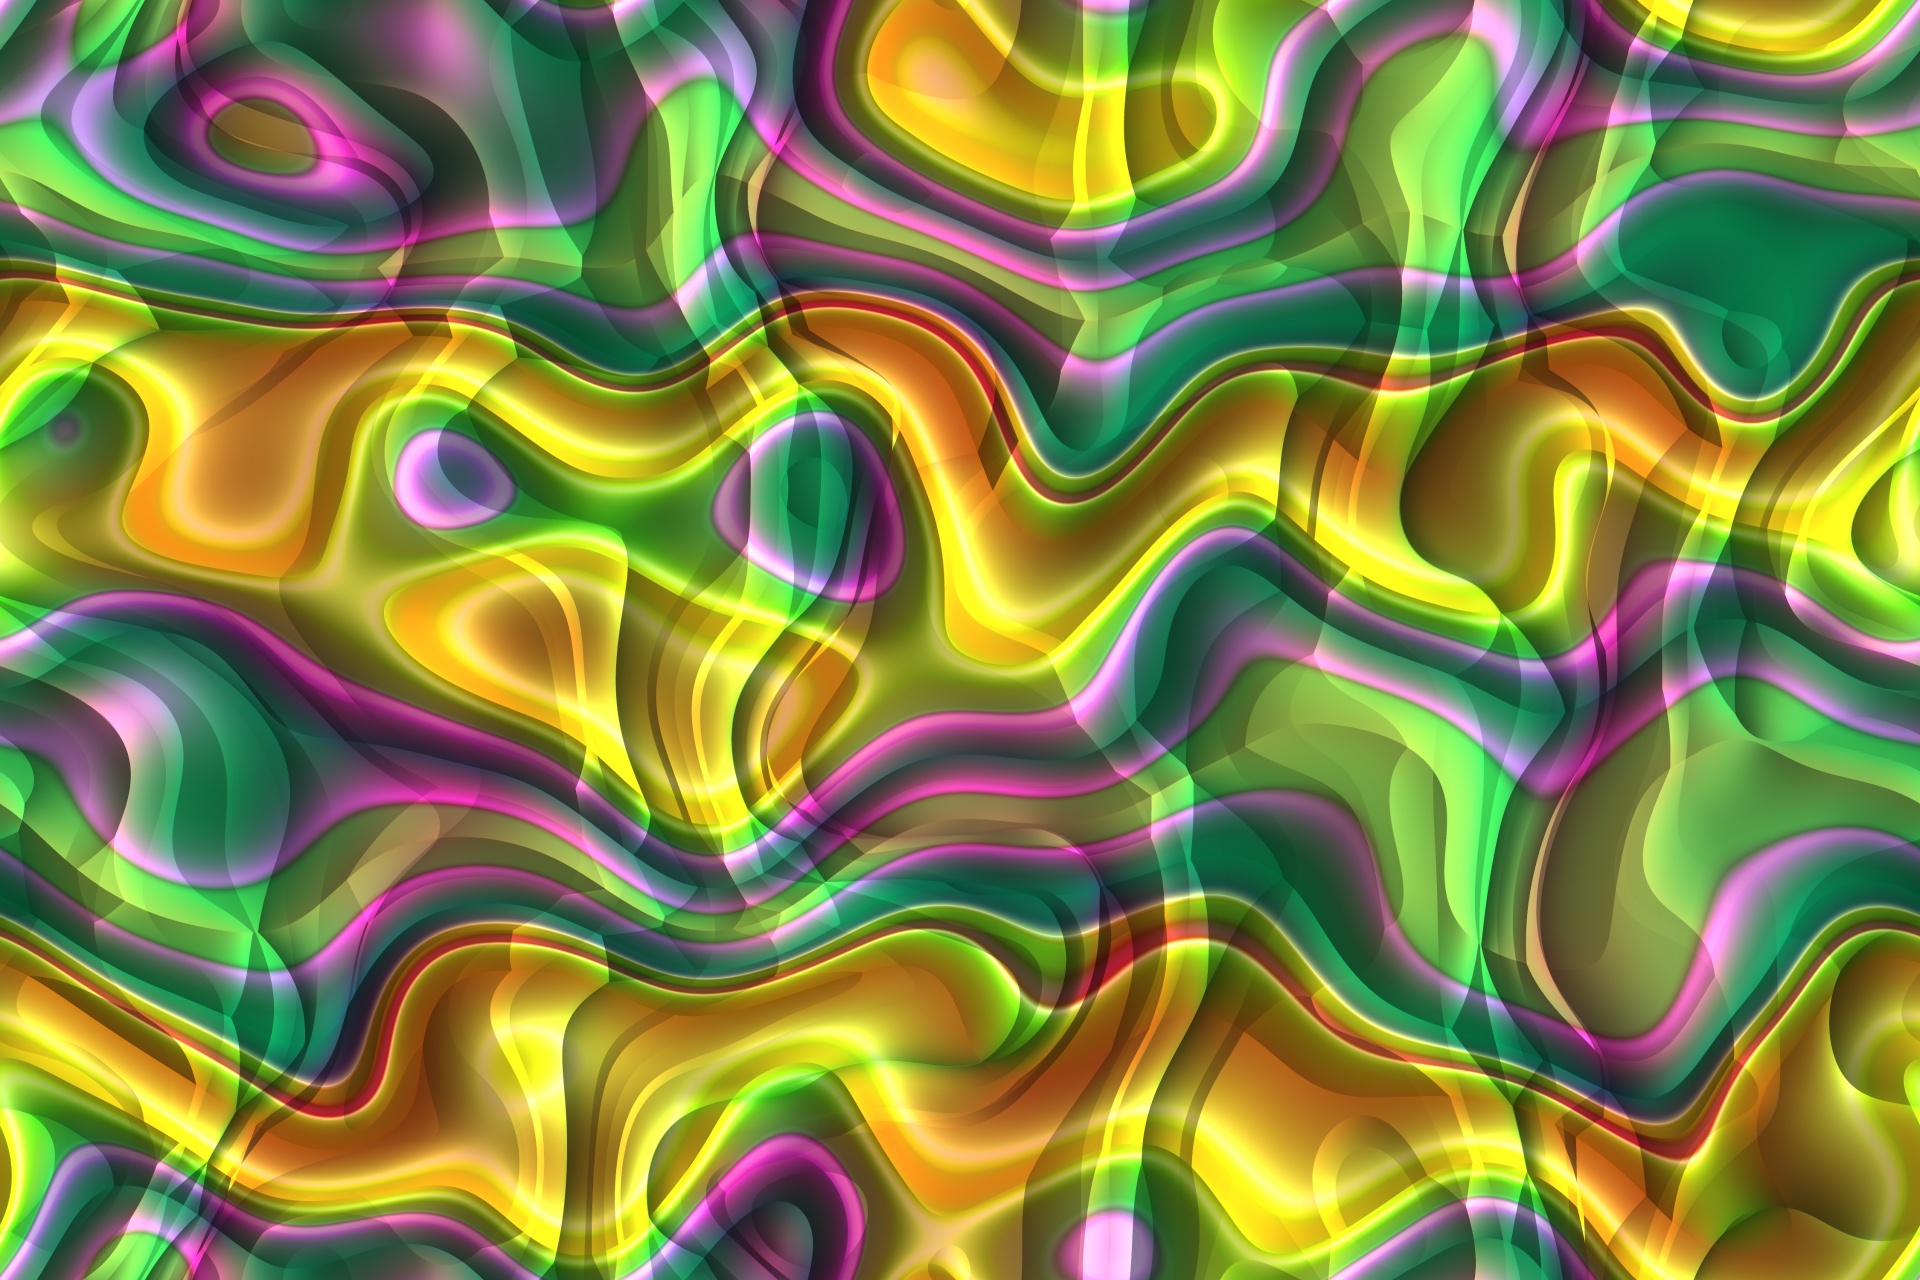 Background Abstract Waves Pattern